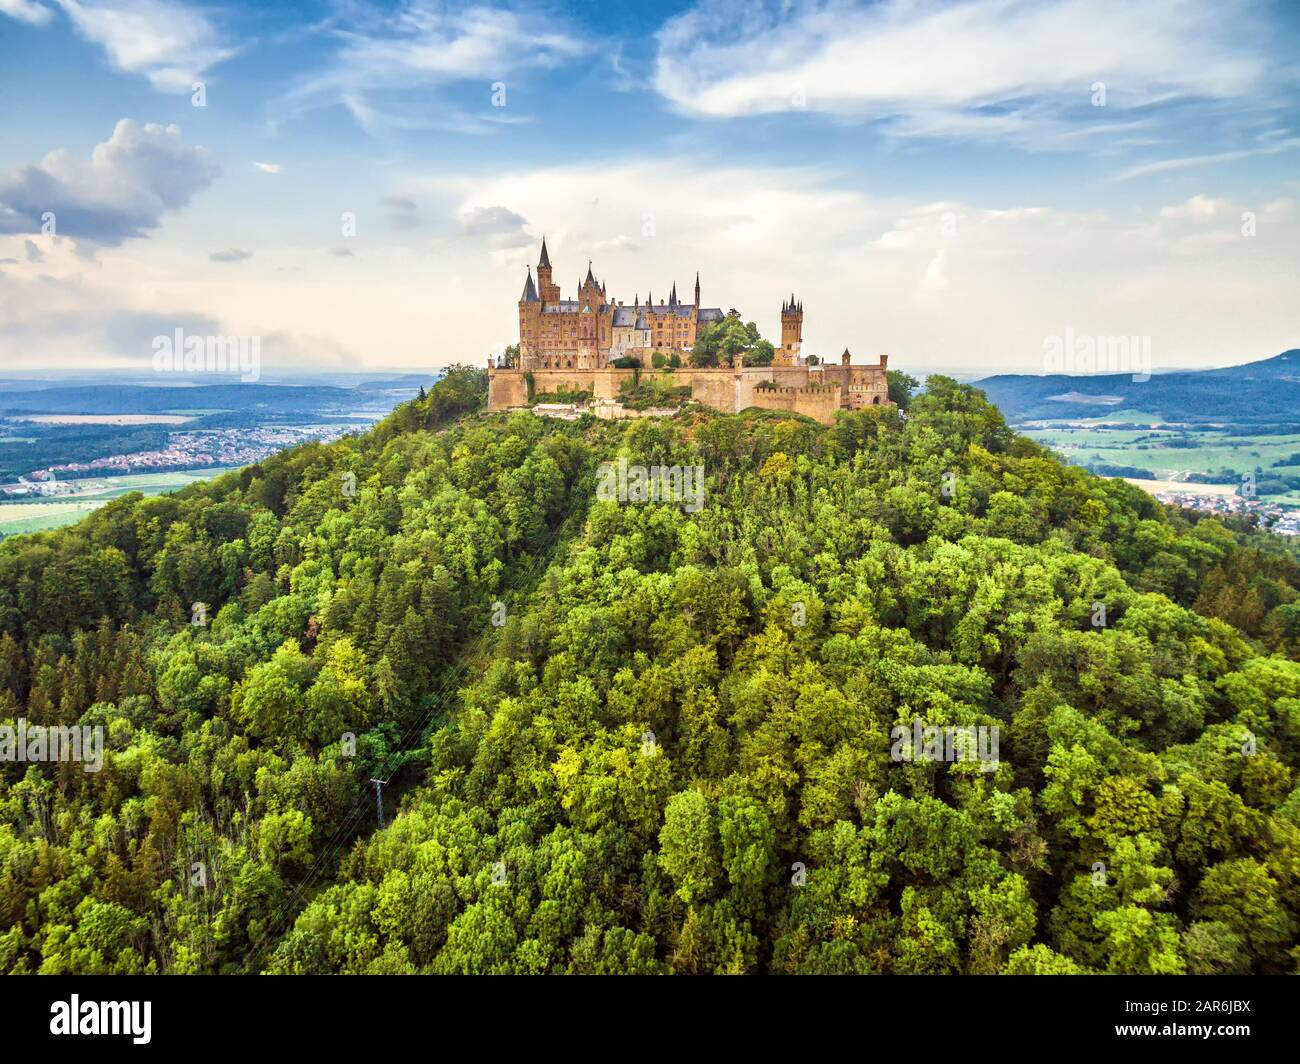 Hohenzollern Castle on mountain top, Germany. This fairytale castle is famous landmark in Stuttgart vicinity. Aerial view of Burg Hohenzollern in summ Stock Photo